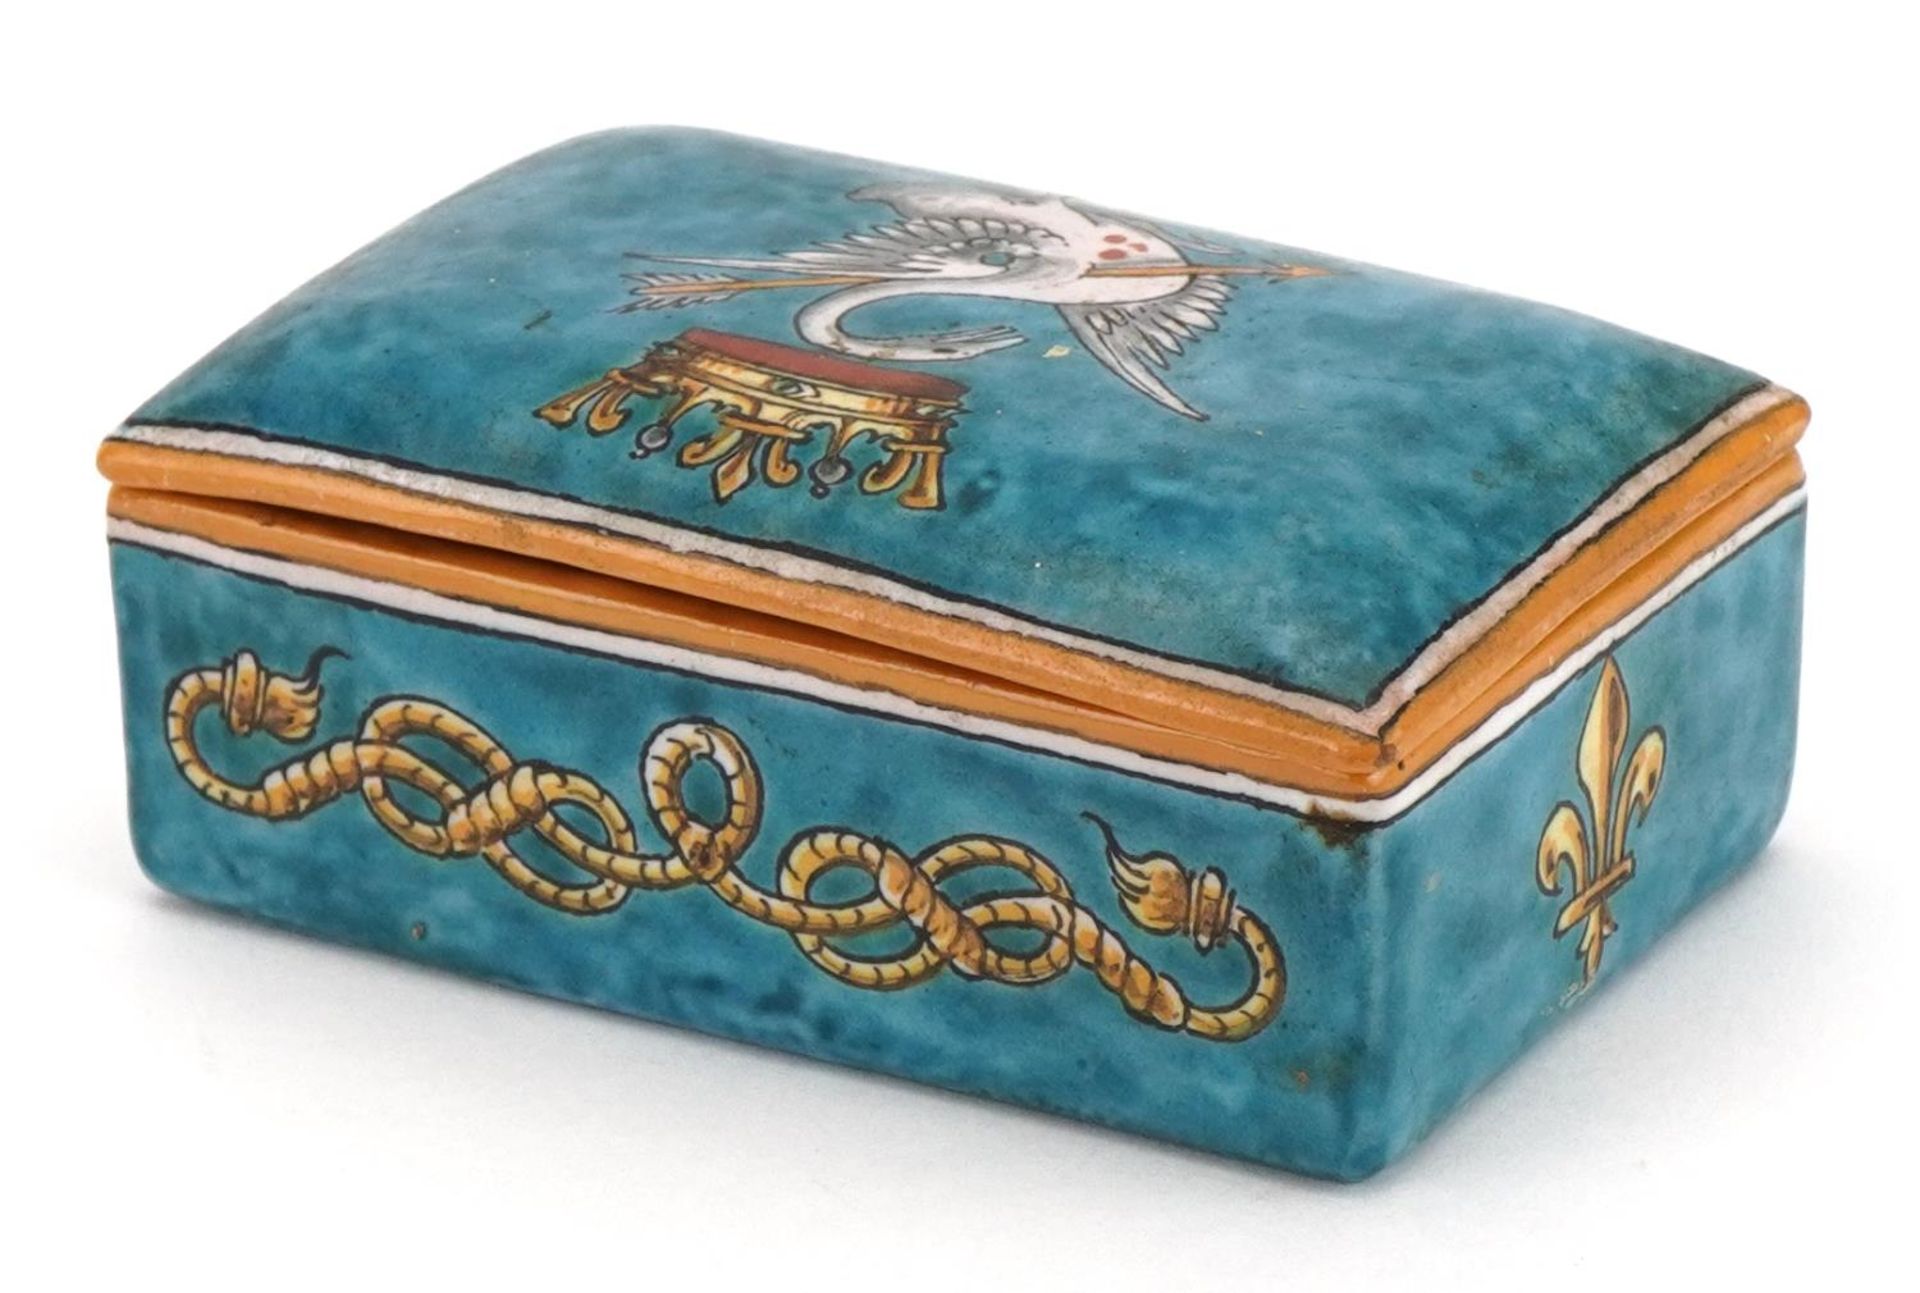 Ulysse Blois, 19th century French faience glazed pottery box and cover hand painted with fleur de - Image 6 of 8